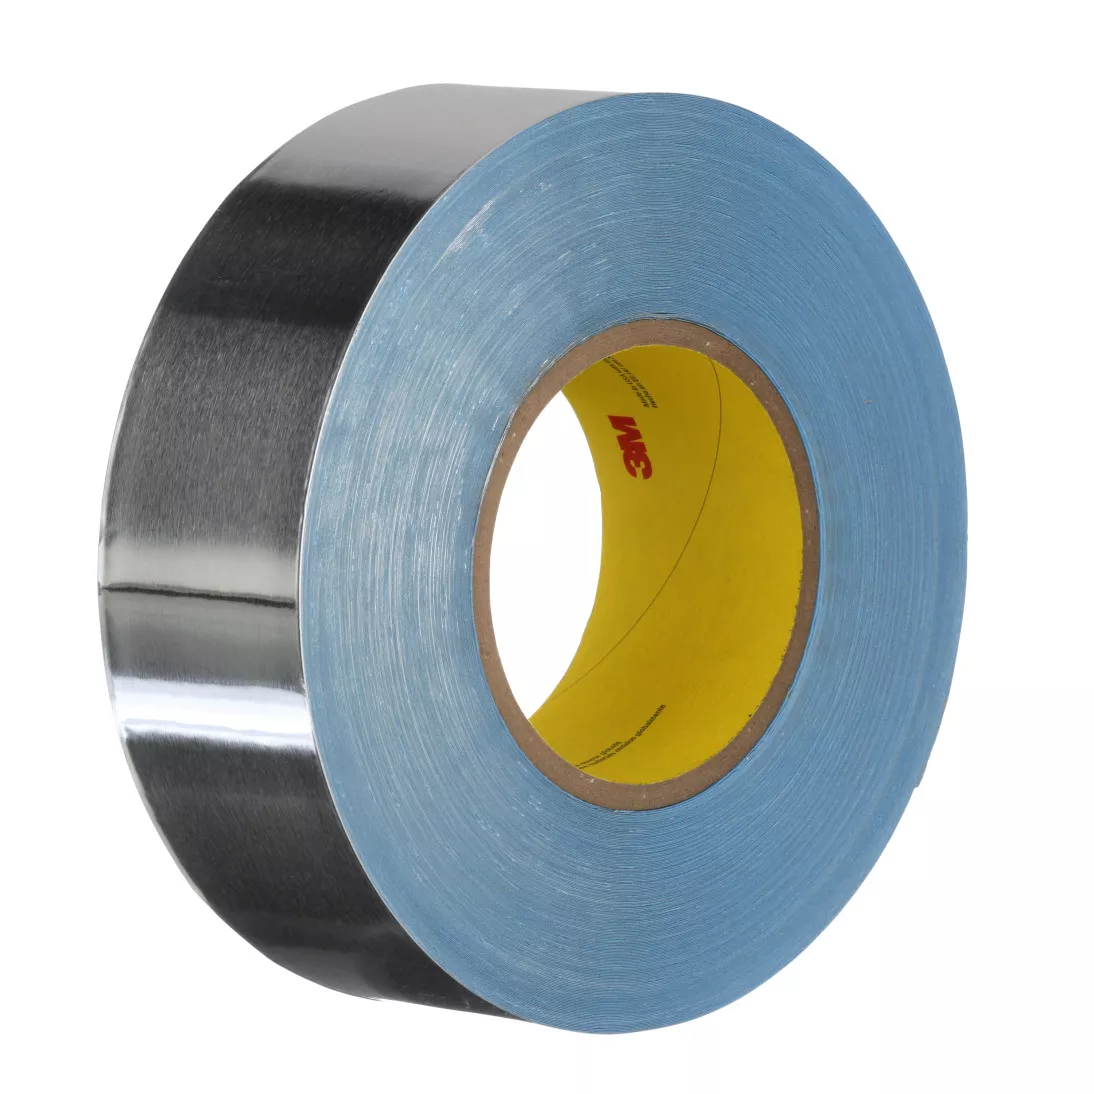 3M™ Vibration Damping Tape 434, Silver, 10 in x 60 yd, 7.5 mil, 1 roll
per case